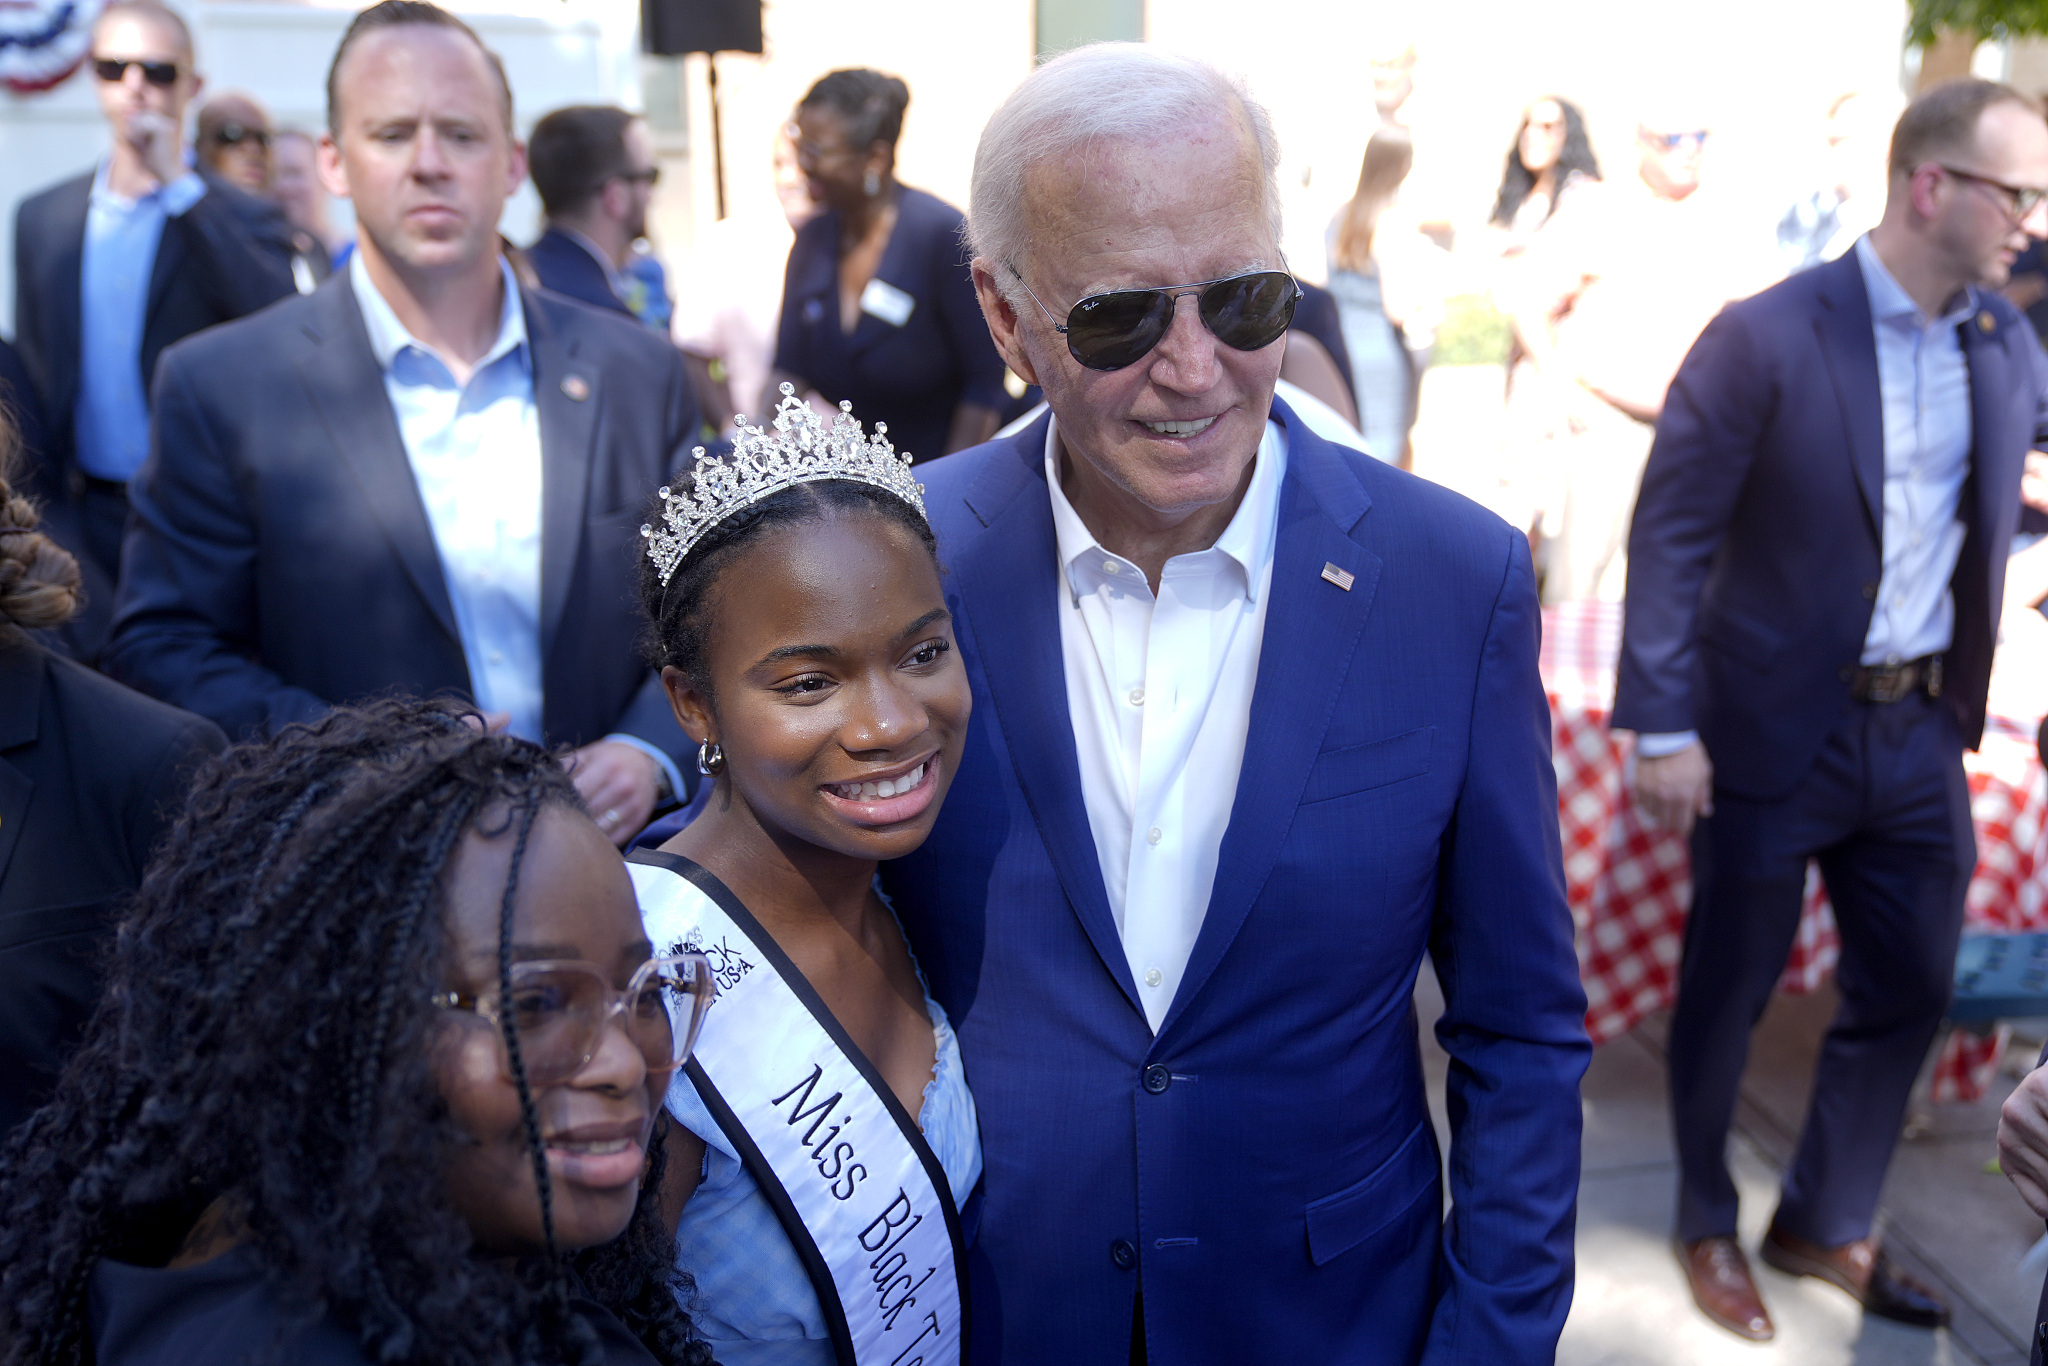 U.S. President Joe Biden takes a photo with supporters at a campaign rally in Harrisburg, Pennsylvania, U.S., July 7, 2024. /CFP